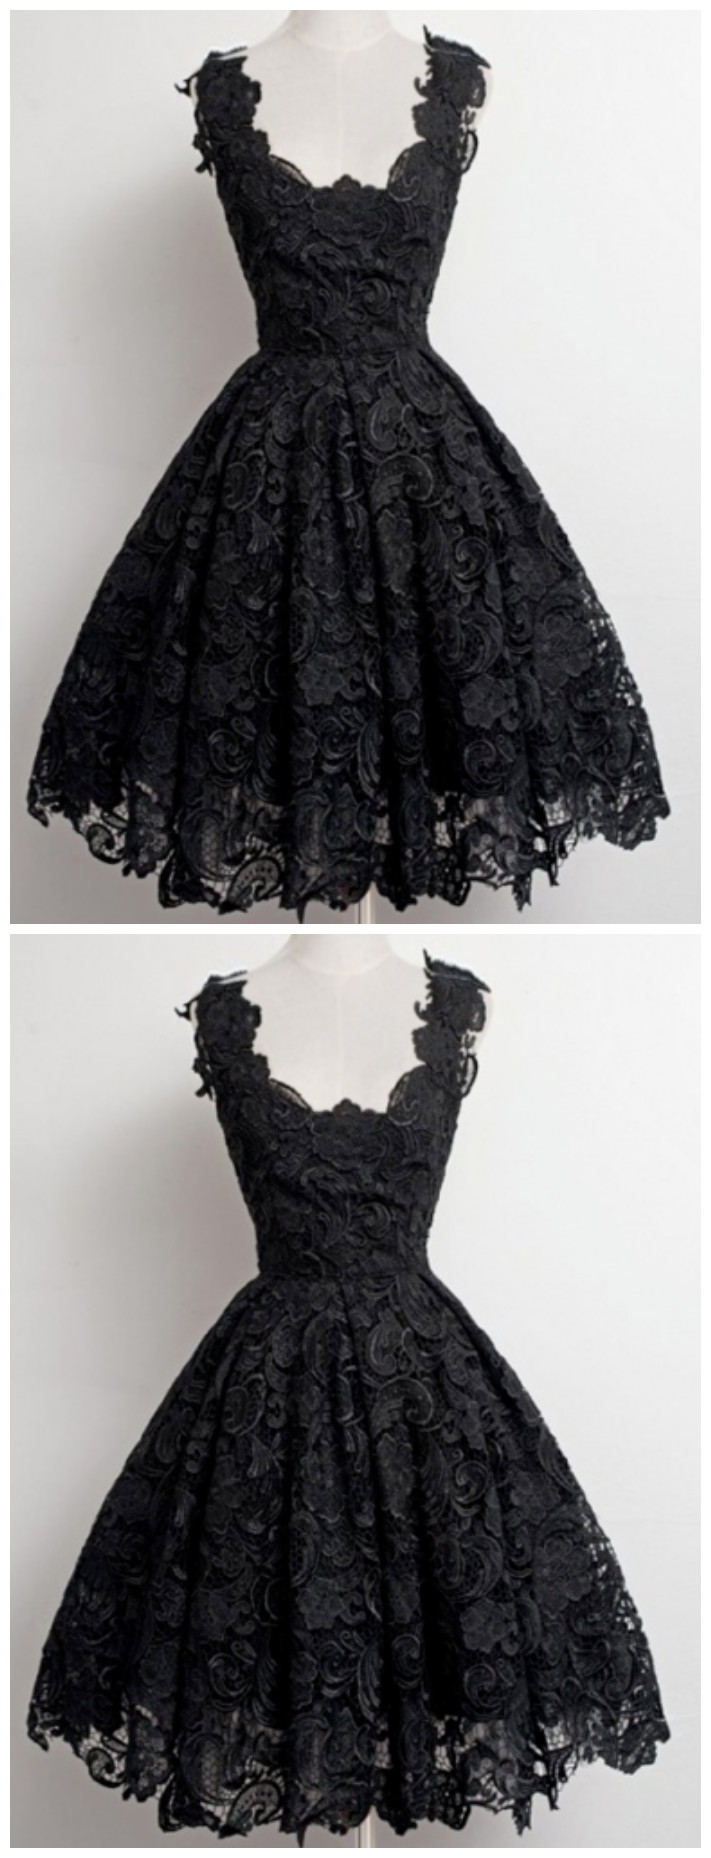 Sassy Wedding Vintage A-line Knee-length Black Lace Prom Homecoming ...